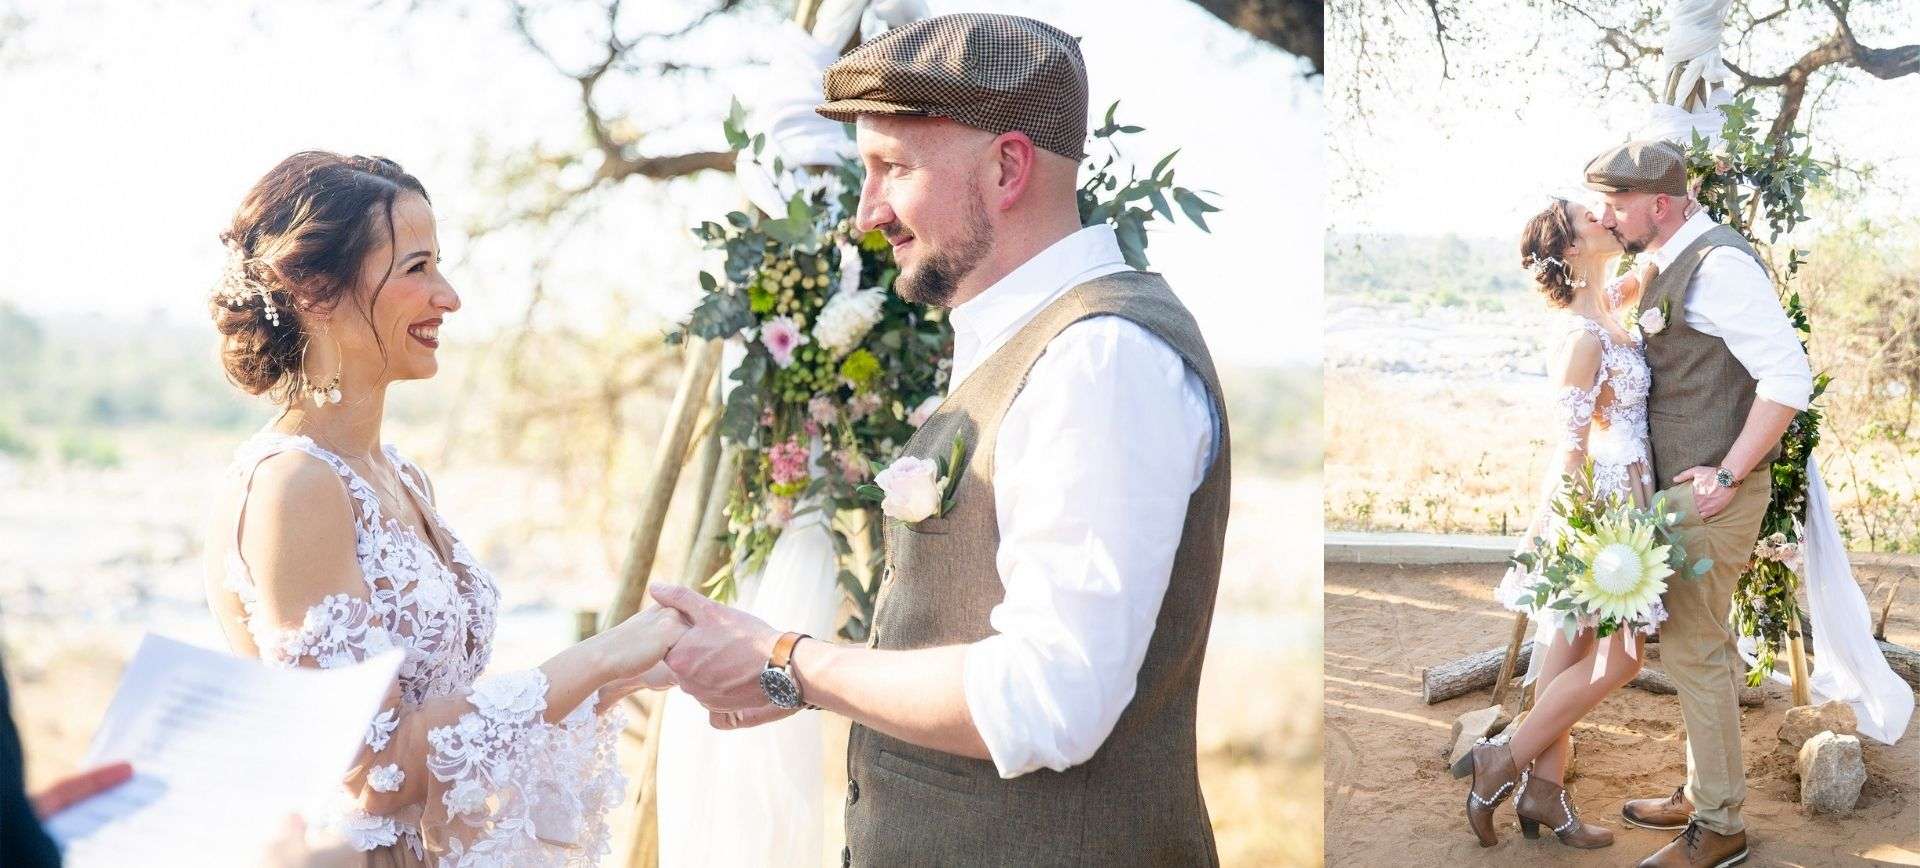 south africa elopement package - safari wedding in africa